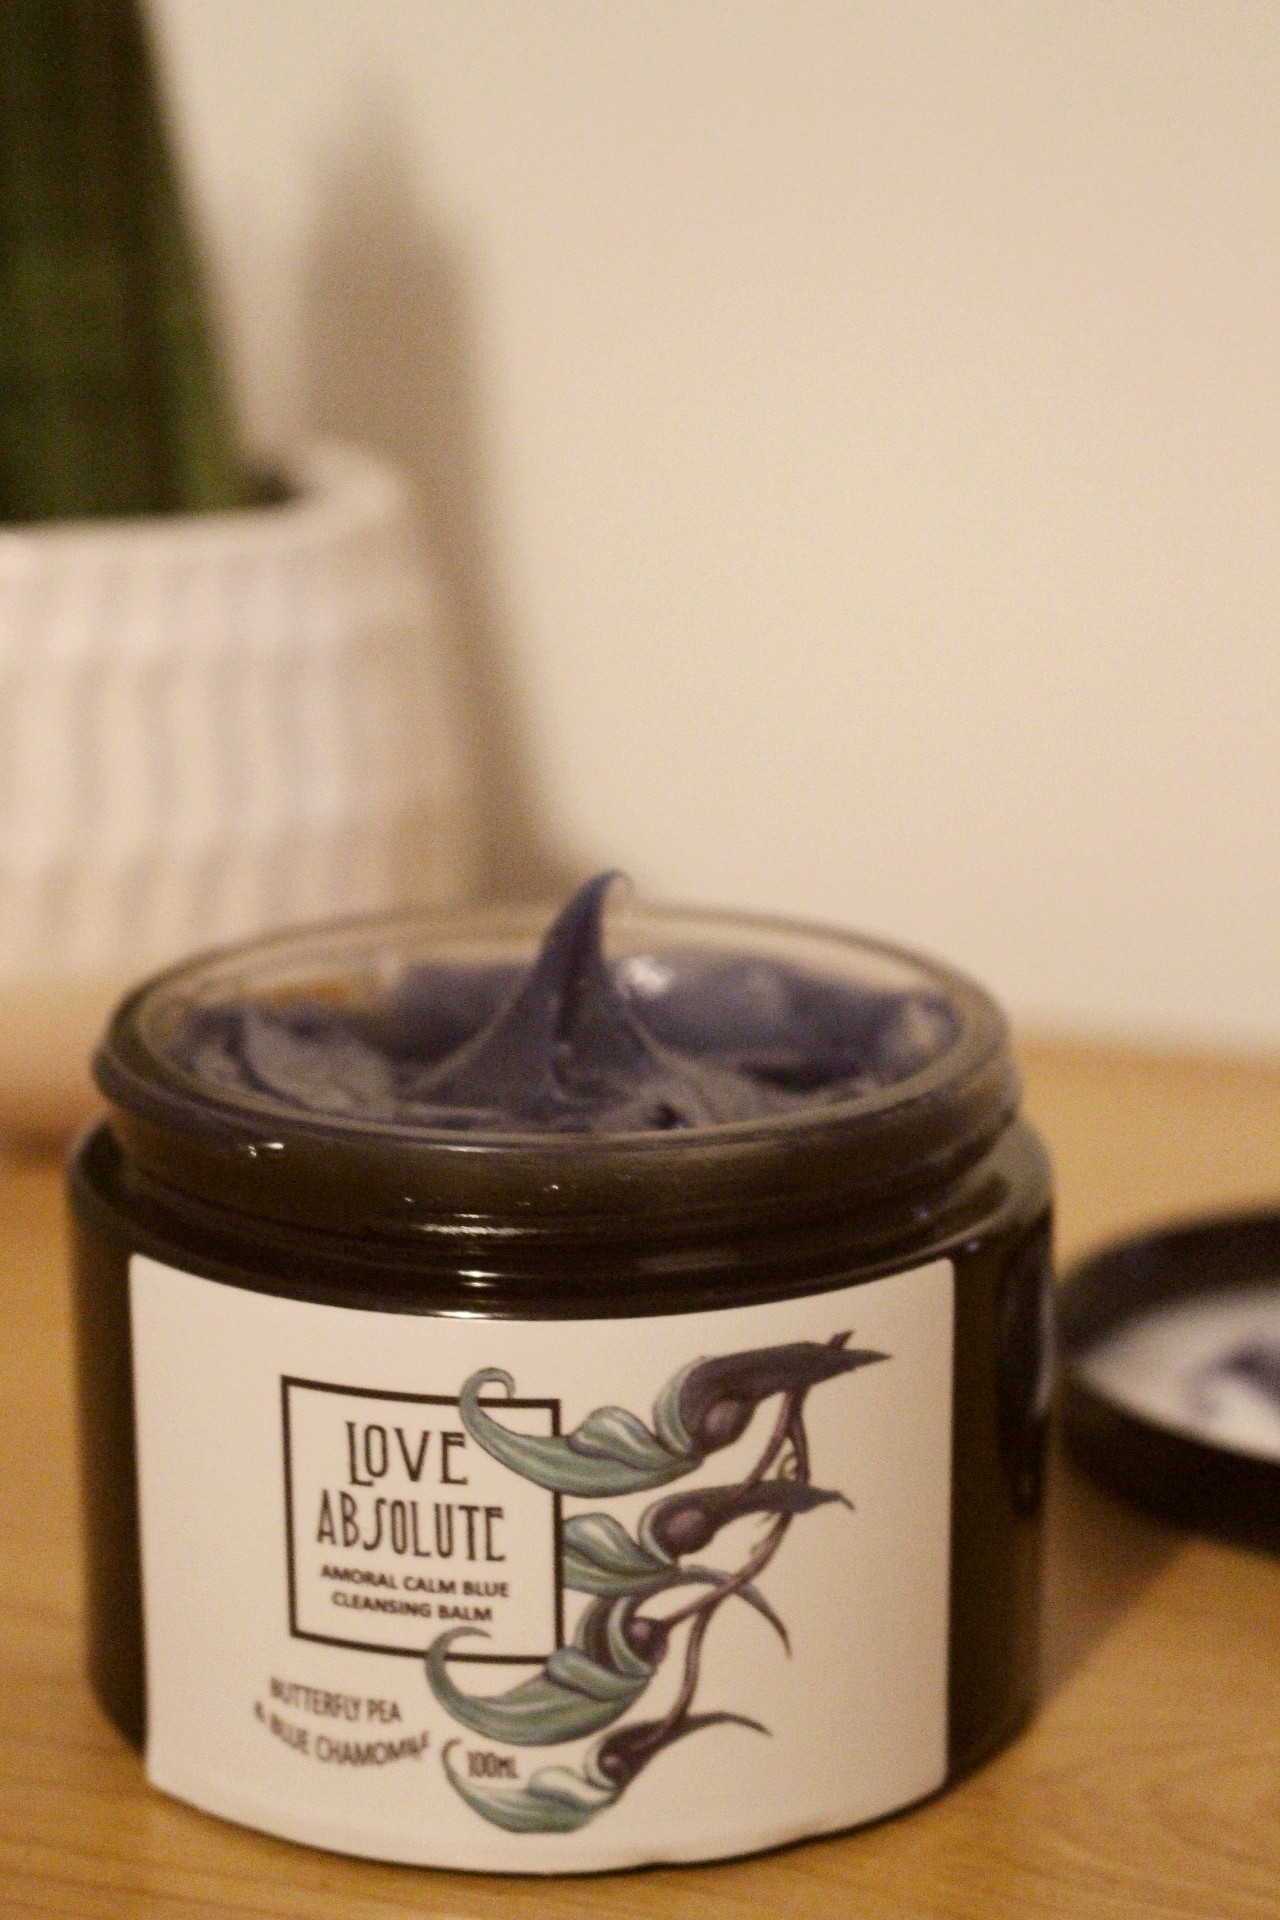 A dark coloured jar sat on a brow wooden surface. The jar has its lid removed and you can see a blue-purple product inside. The label on the jar reads "Love Absolute Amoral Calm Blue Cleansing Balm"